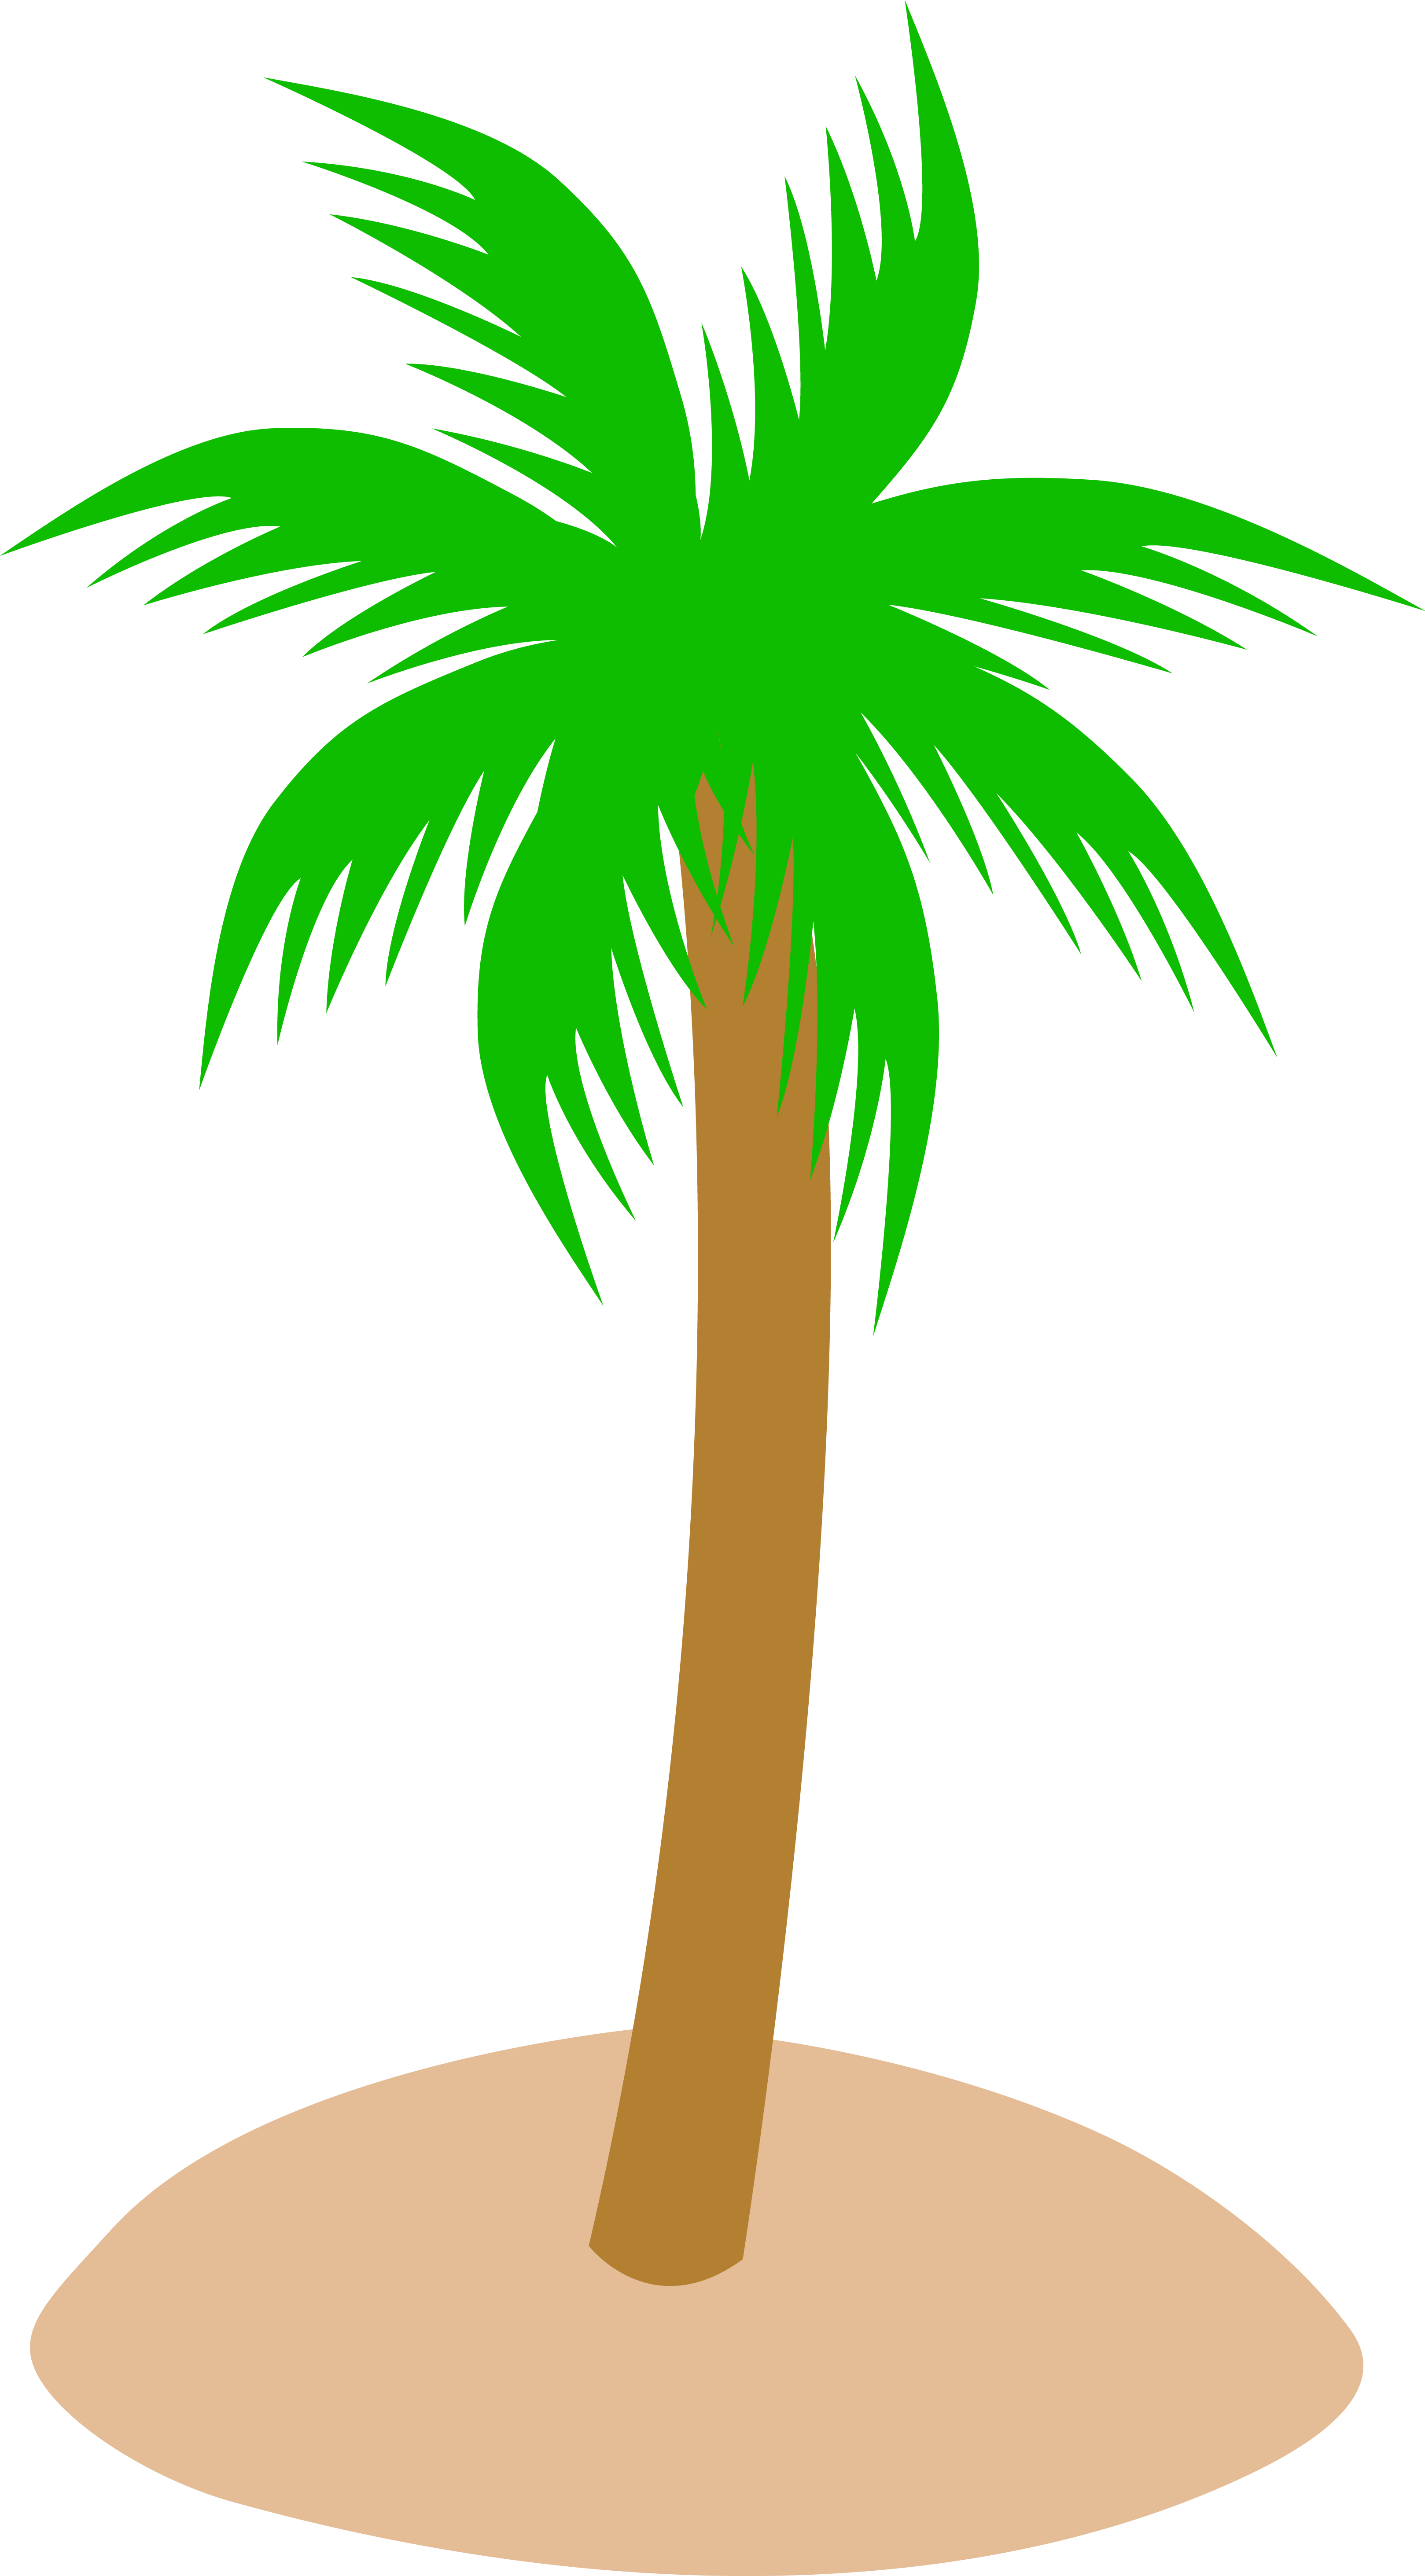 Beach island palm tree with coconuts clipart 